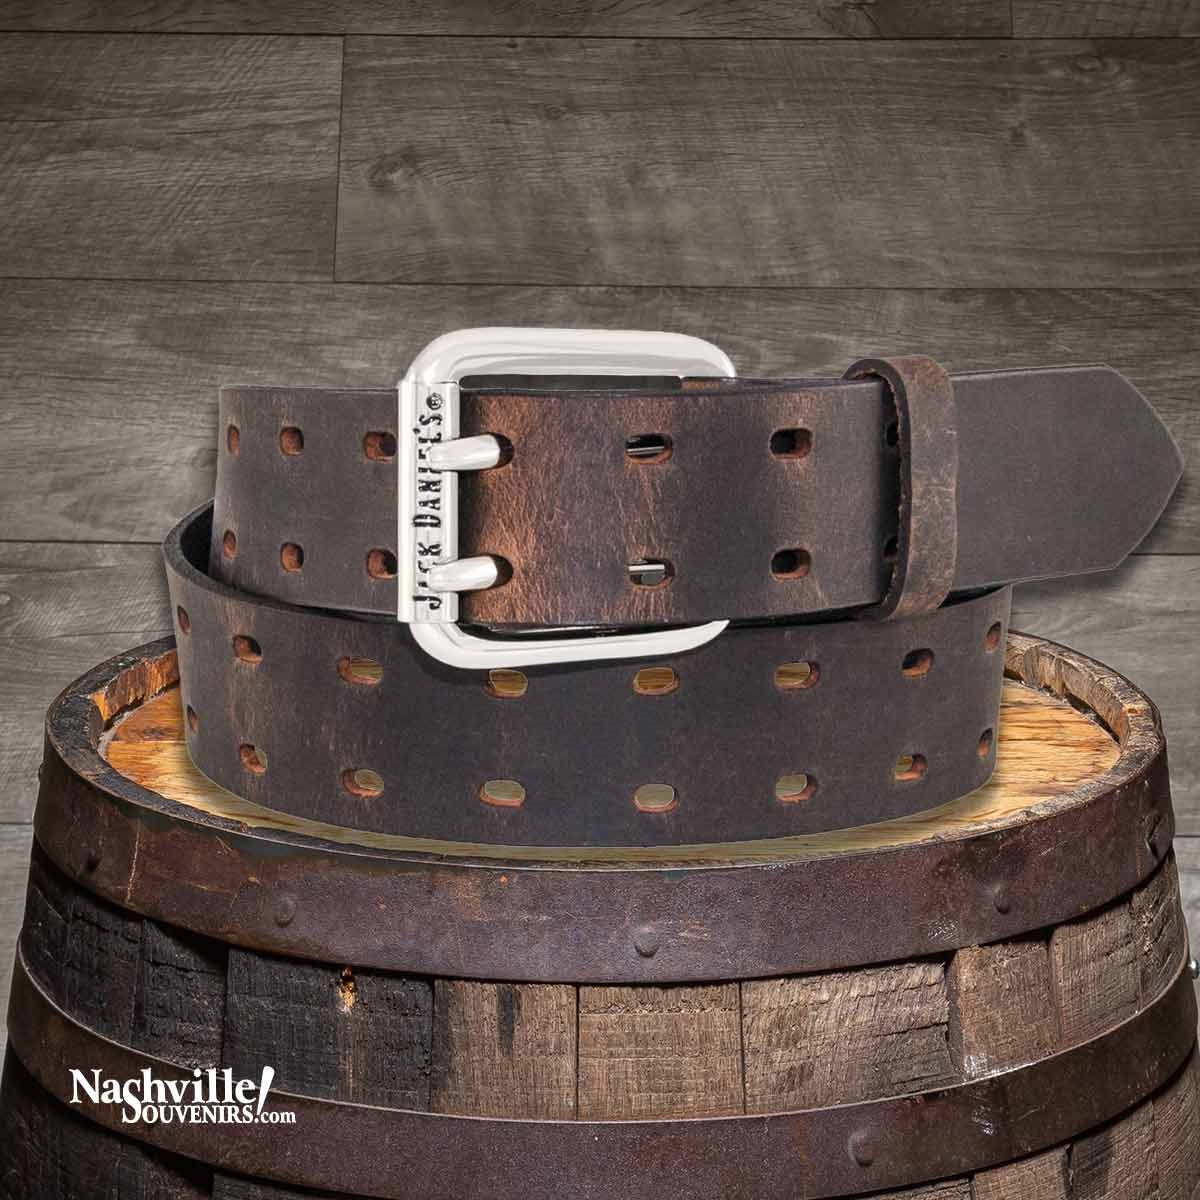 Officially licensed Jack Daniels Double Tongue Buckle Belt in blacker brown full-grain leather. Get yours today with FREE SHIPPING on all US orders over $75!